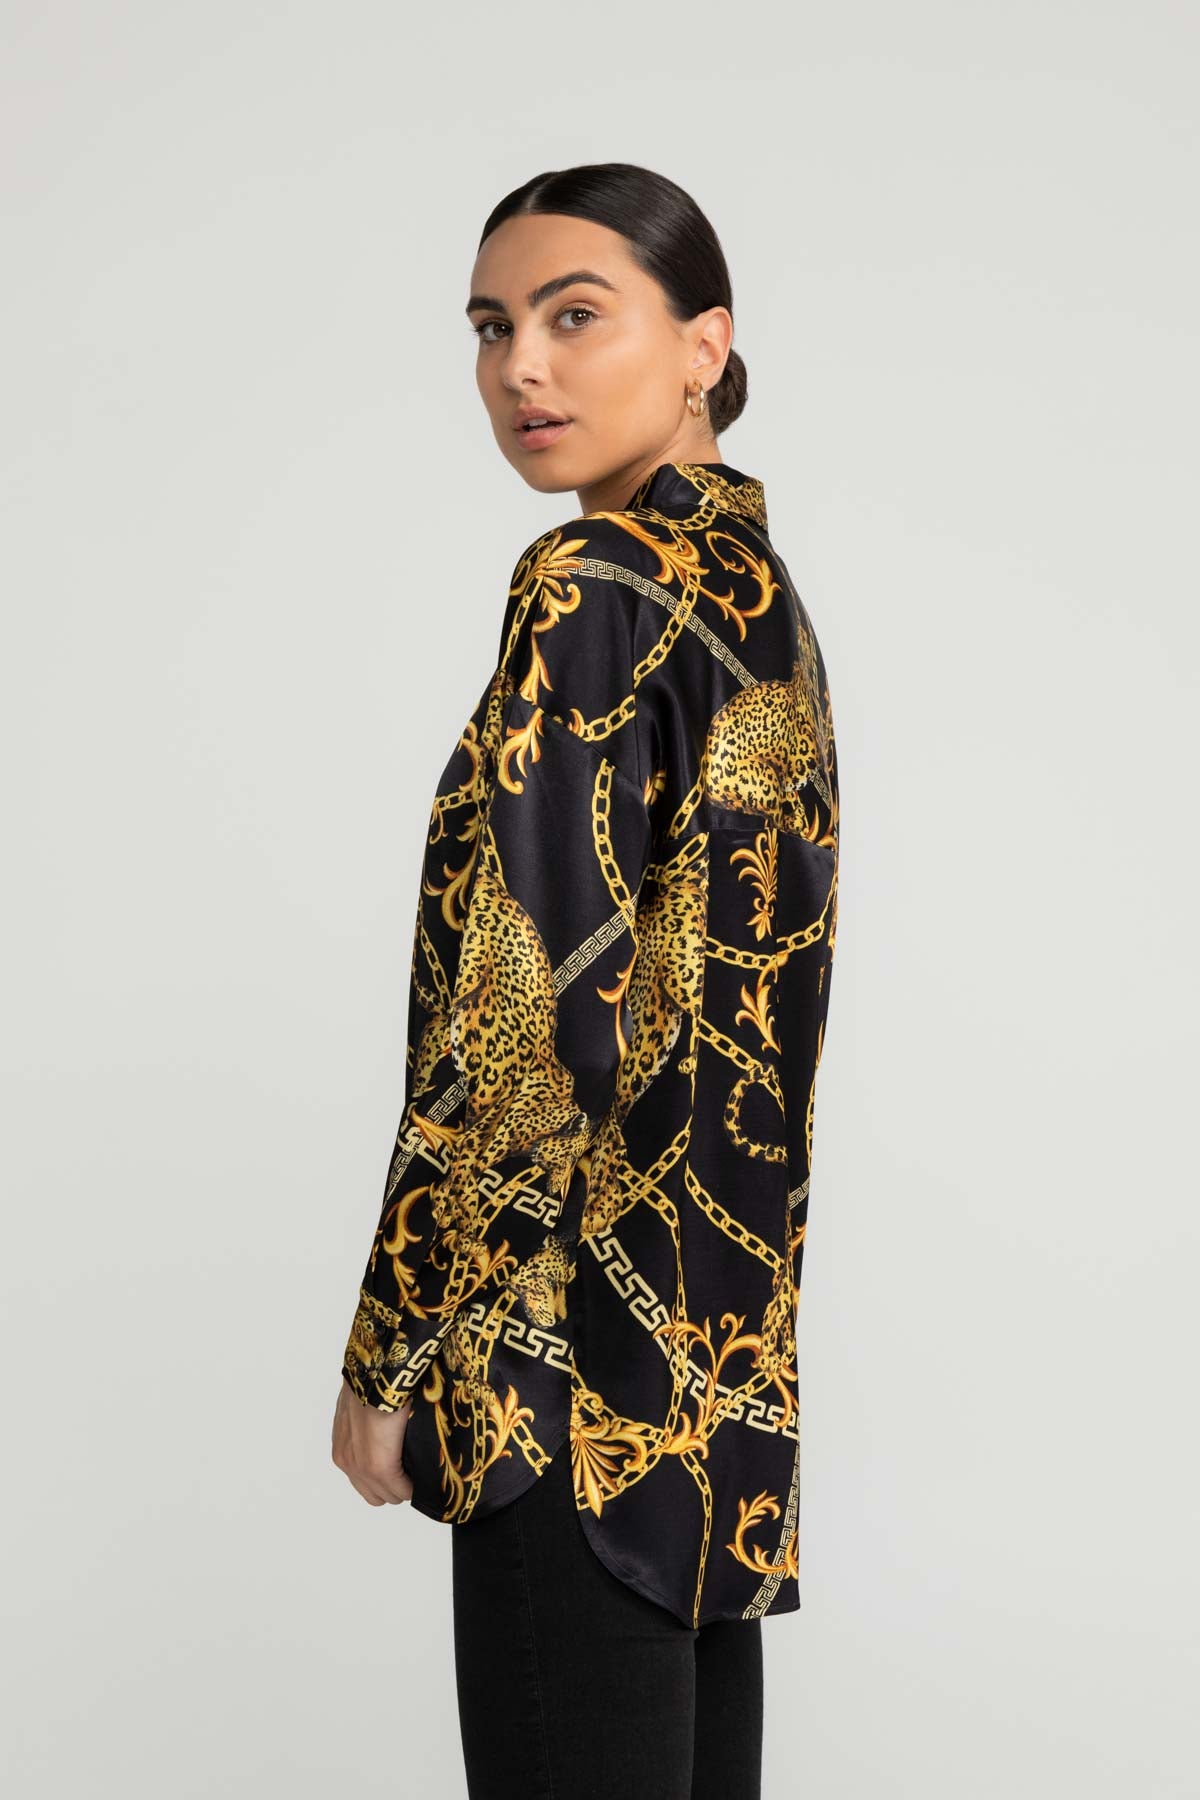 Alaiya blouse in black and gold pattern by LOVJOI made of ENKA™ viscose and Ecovero™